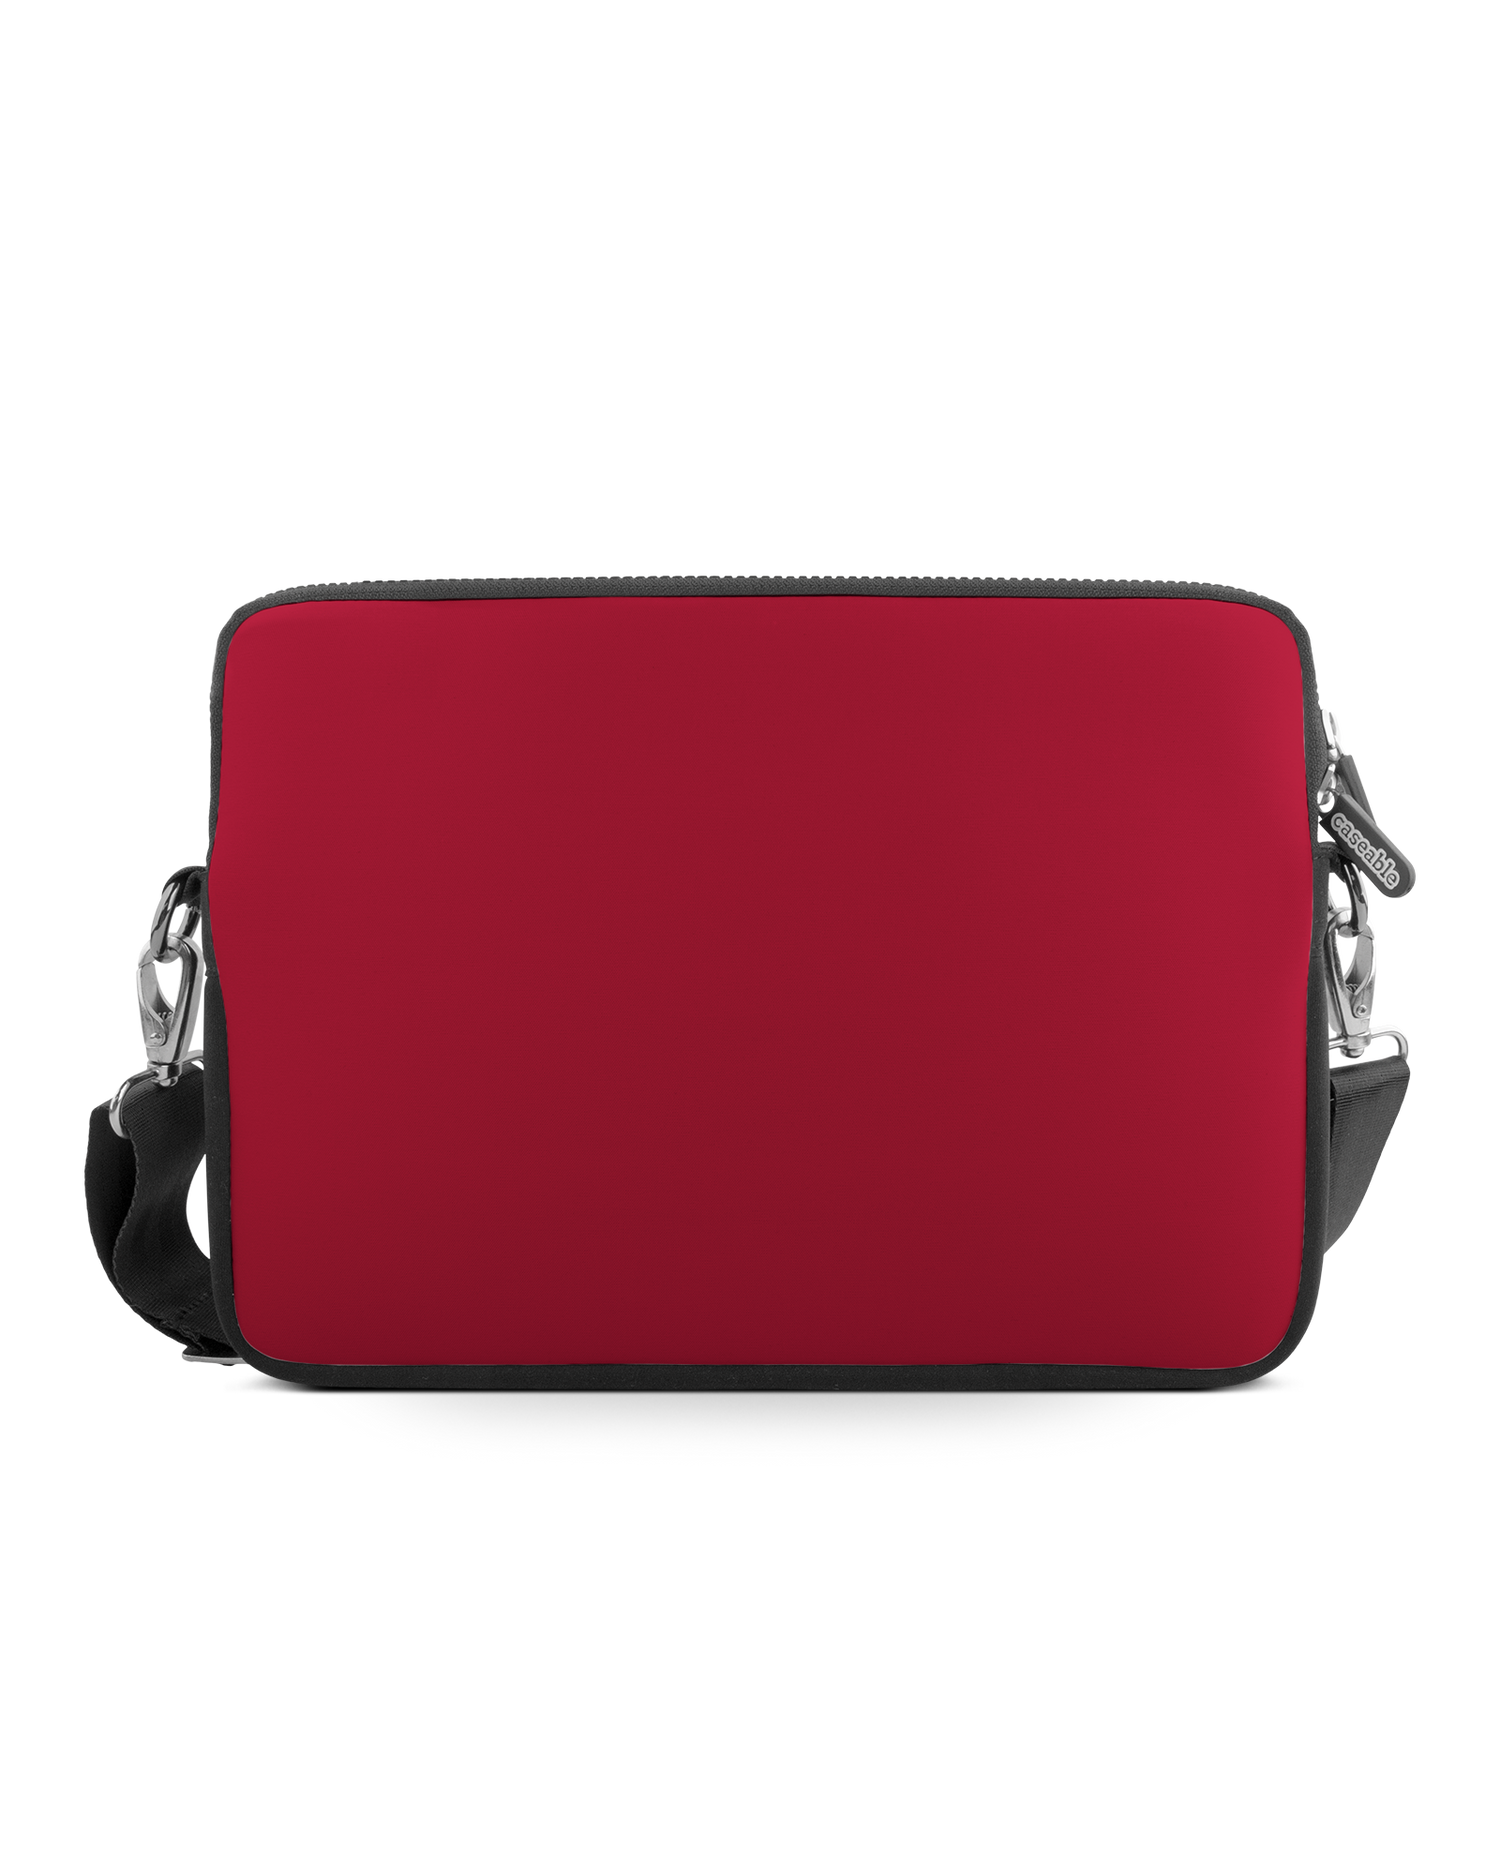 RED Premium Laptop Bag 13 inch: Front View